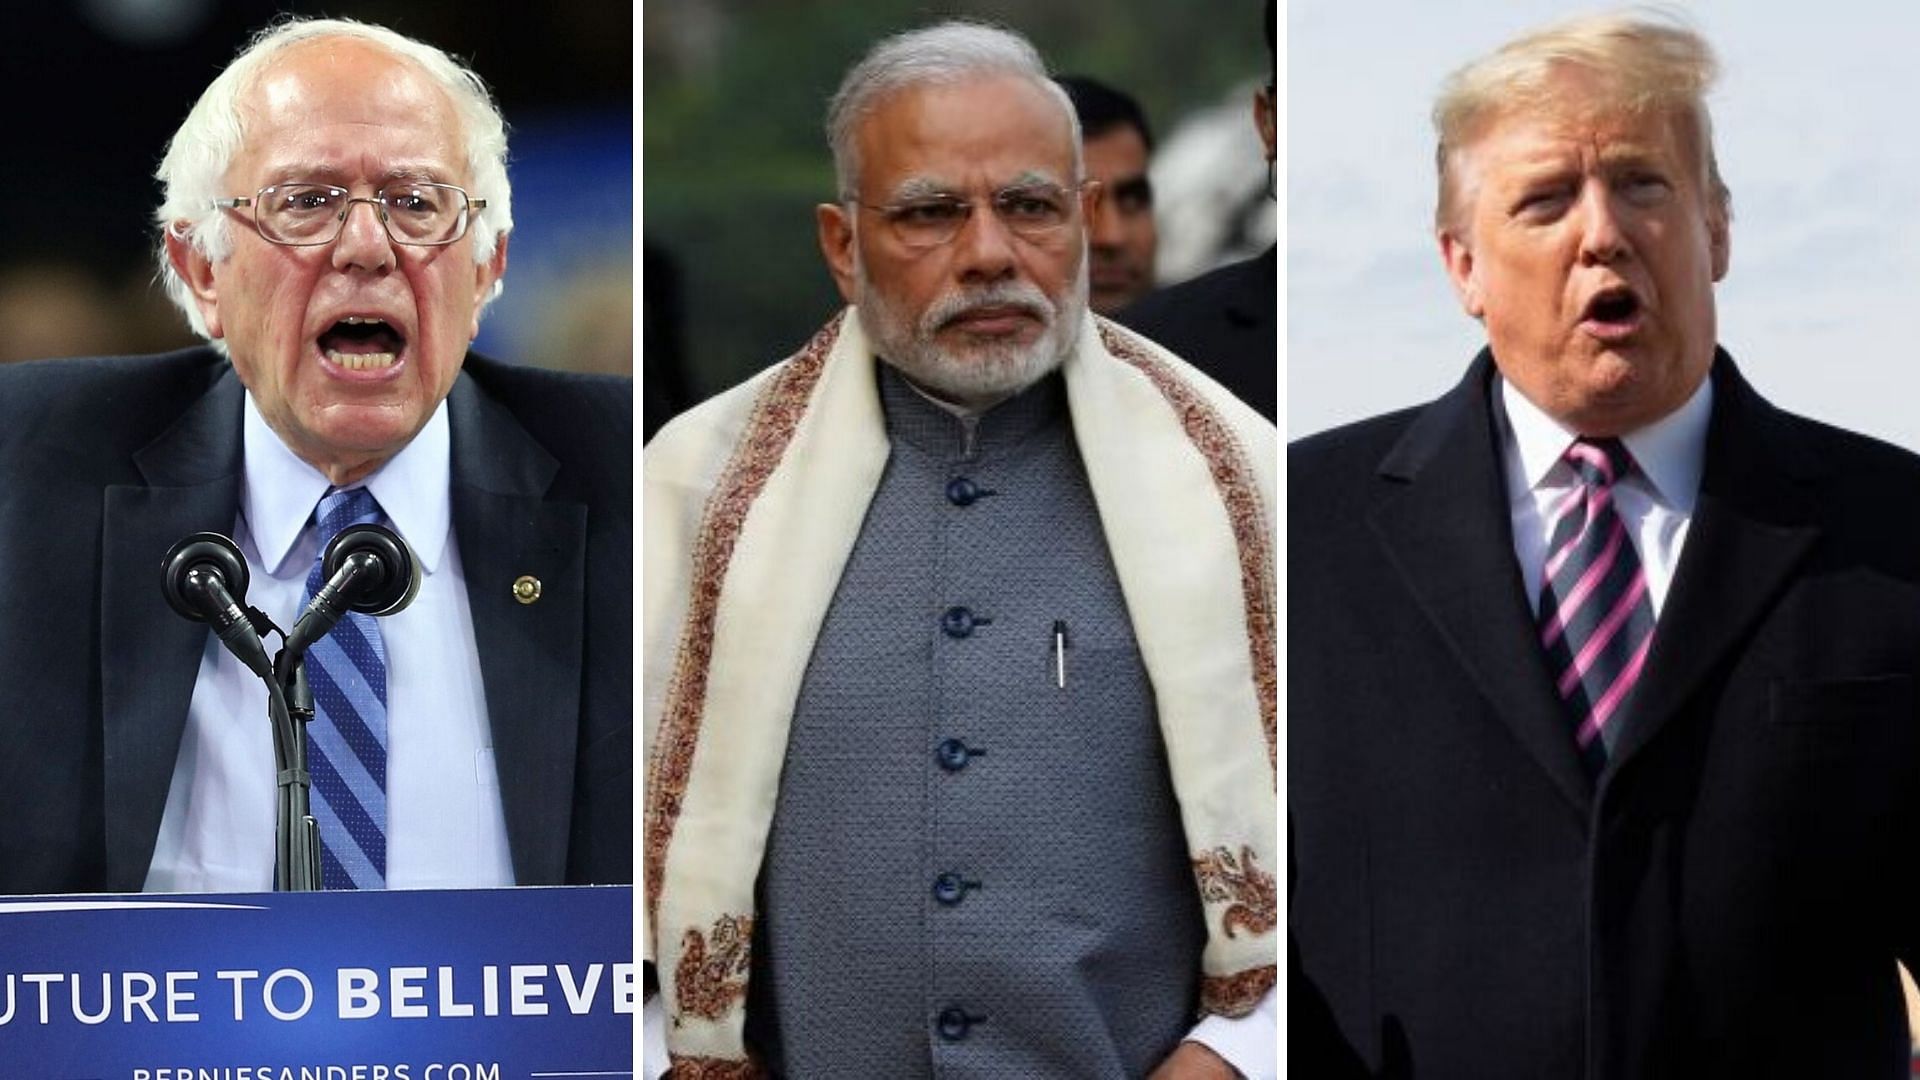 Slamming the US president, Sanders said the Trump’s statement regarding the violence in New Delhi during his India visit was a “failure of leadership”.